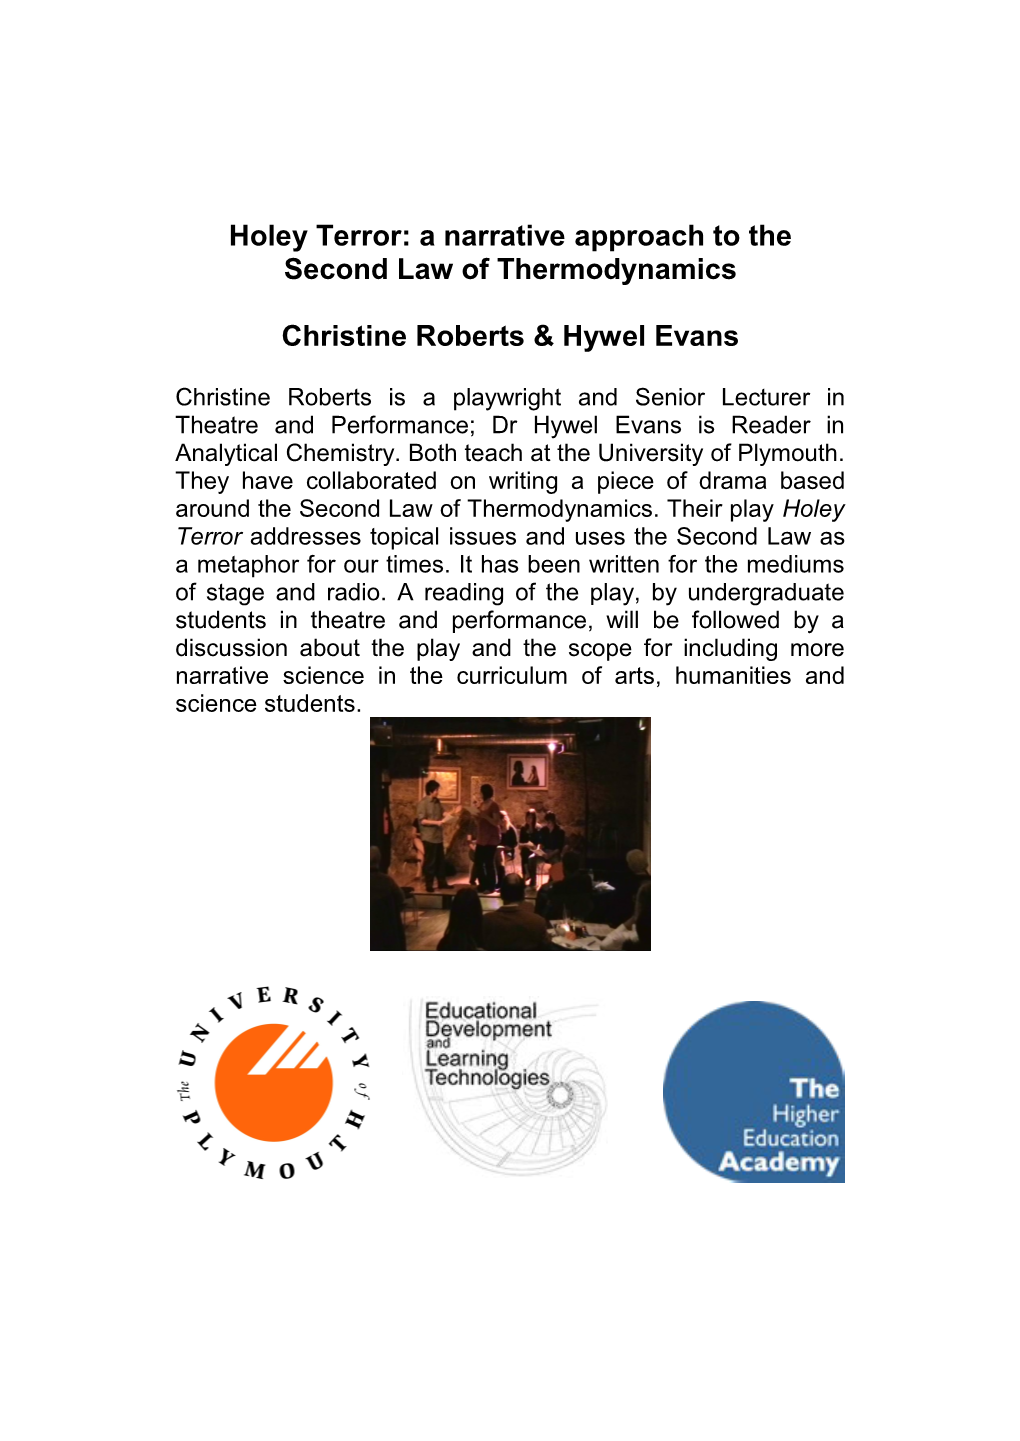 Holey Terror: a Narrative Approach to the Second Law of Thermodynamics